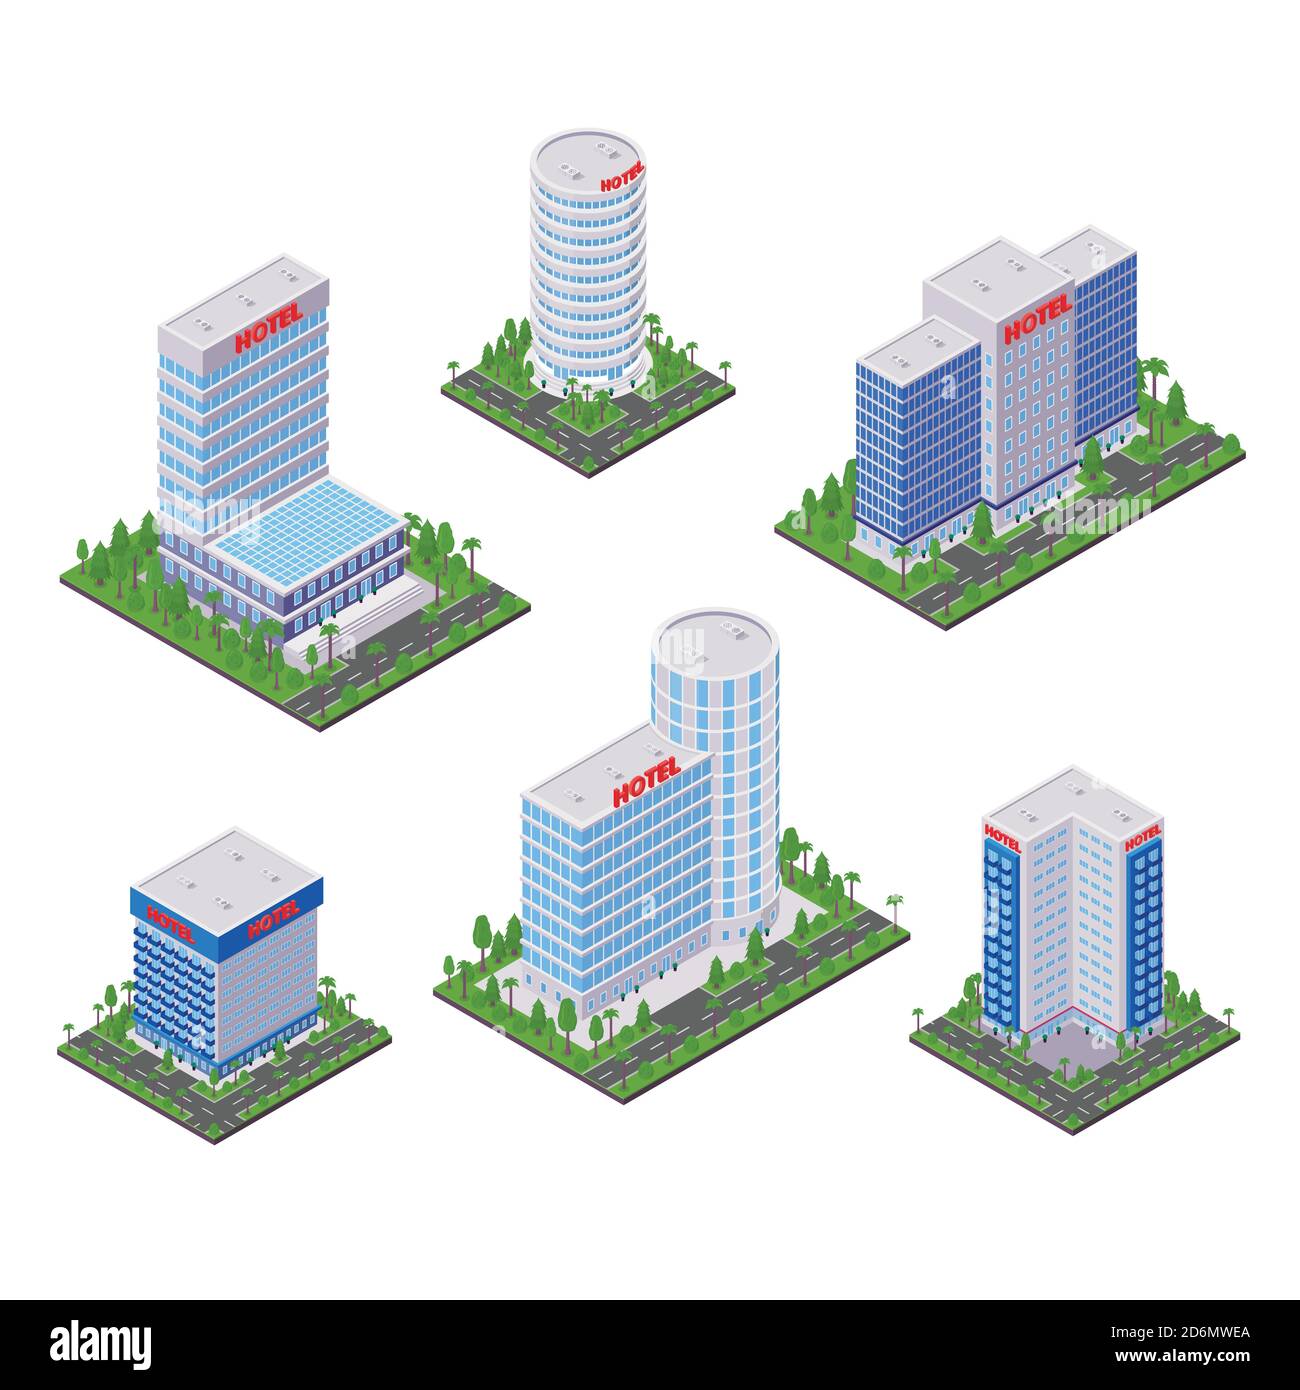 City hotel modern buildings, vector 3d isometric icons and design elements set. Business real estate objects isolated on white background. Stock Vector